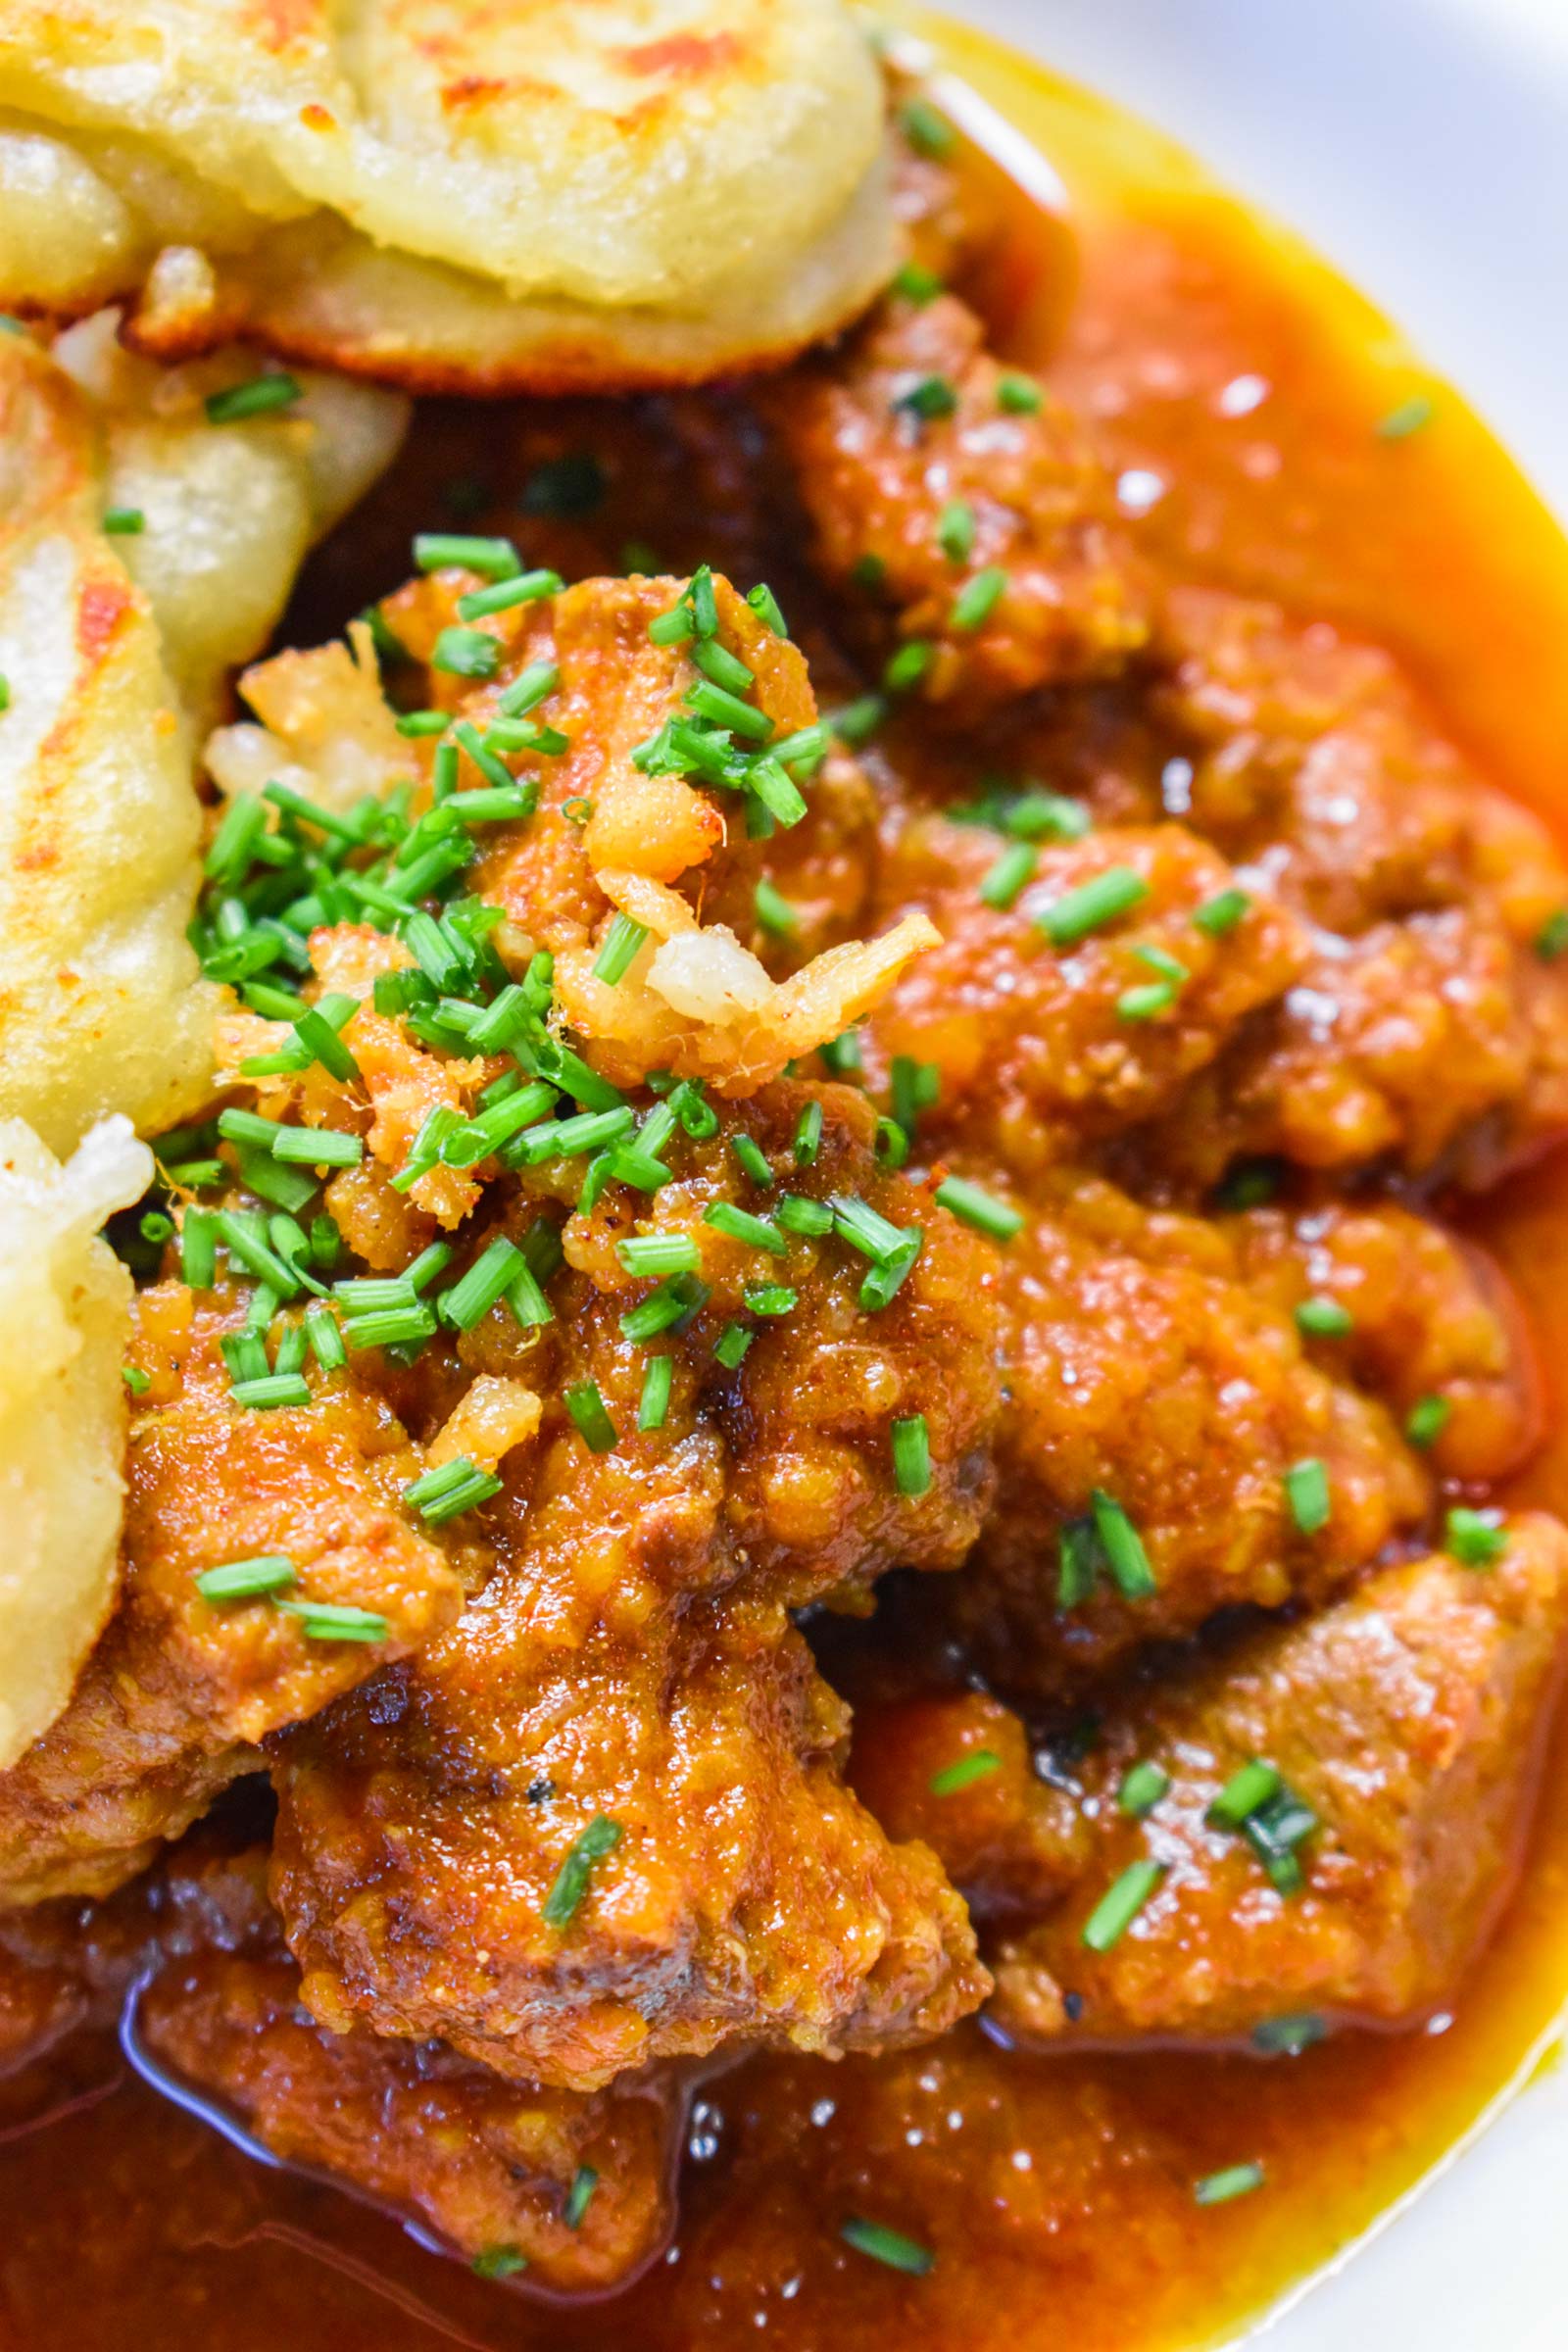 Best traditional Hungarian Goulash recipe! Guaranteed! - The chef's cult